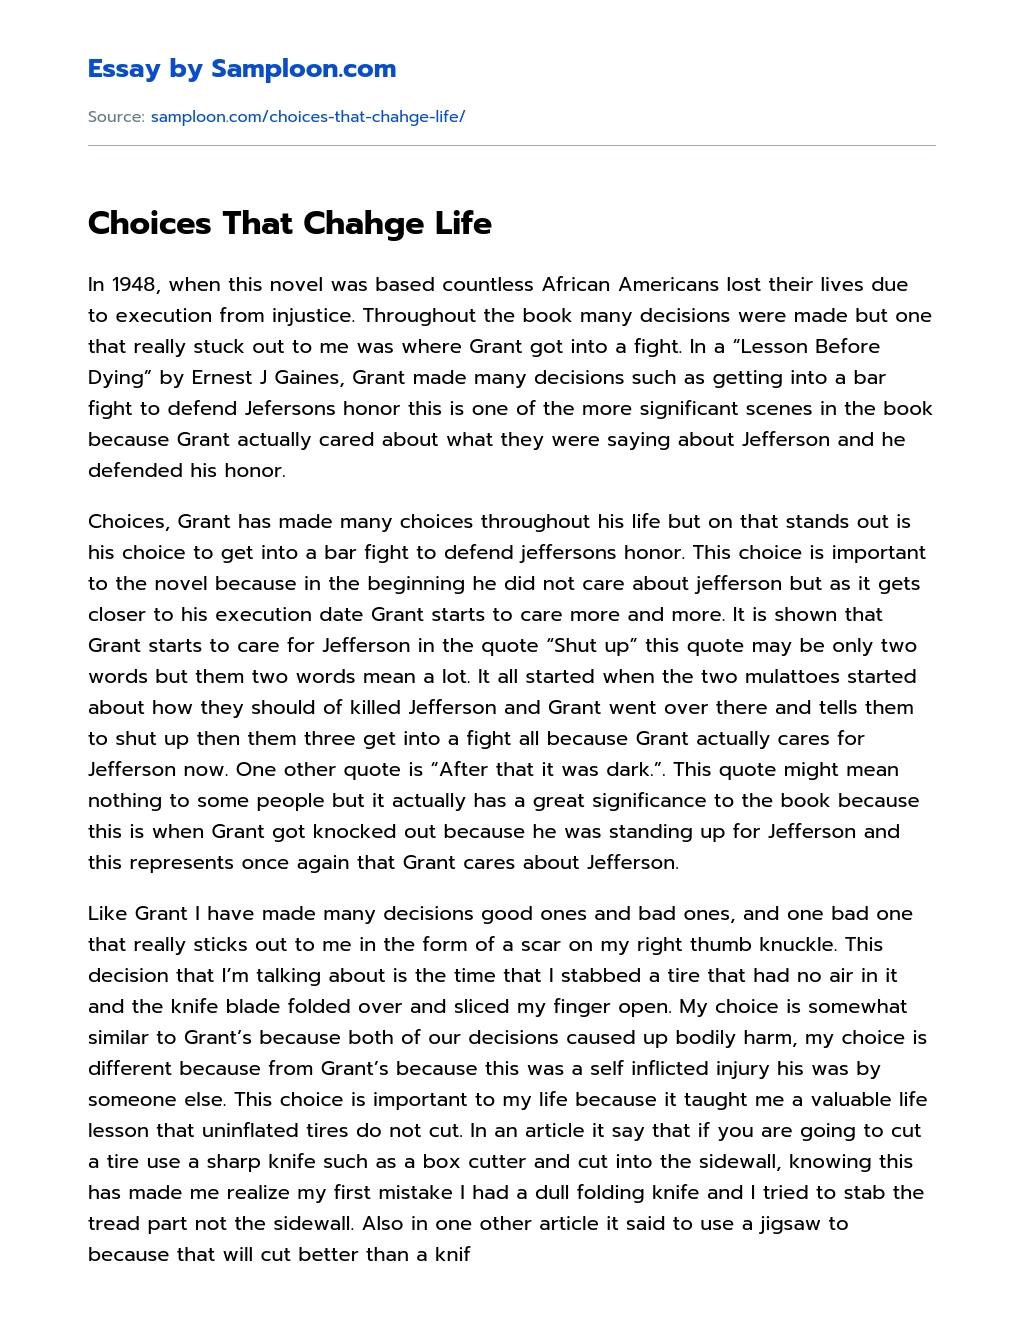 Choices That Chahge Life essay